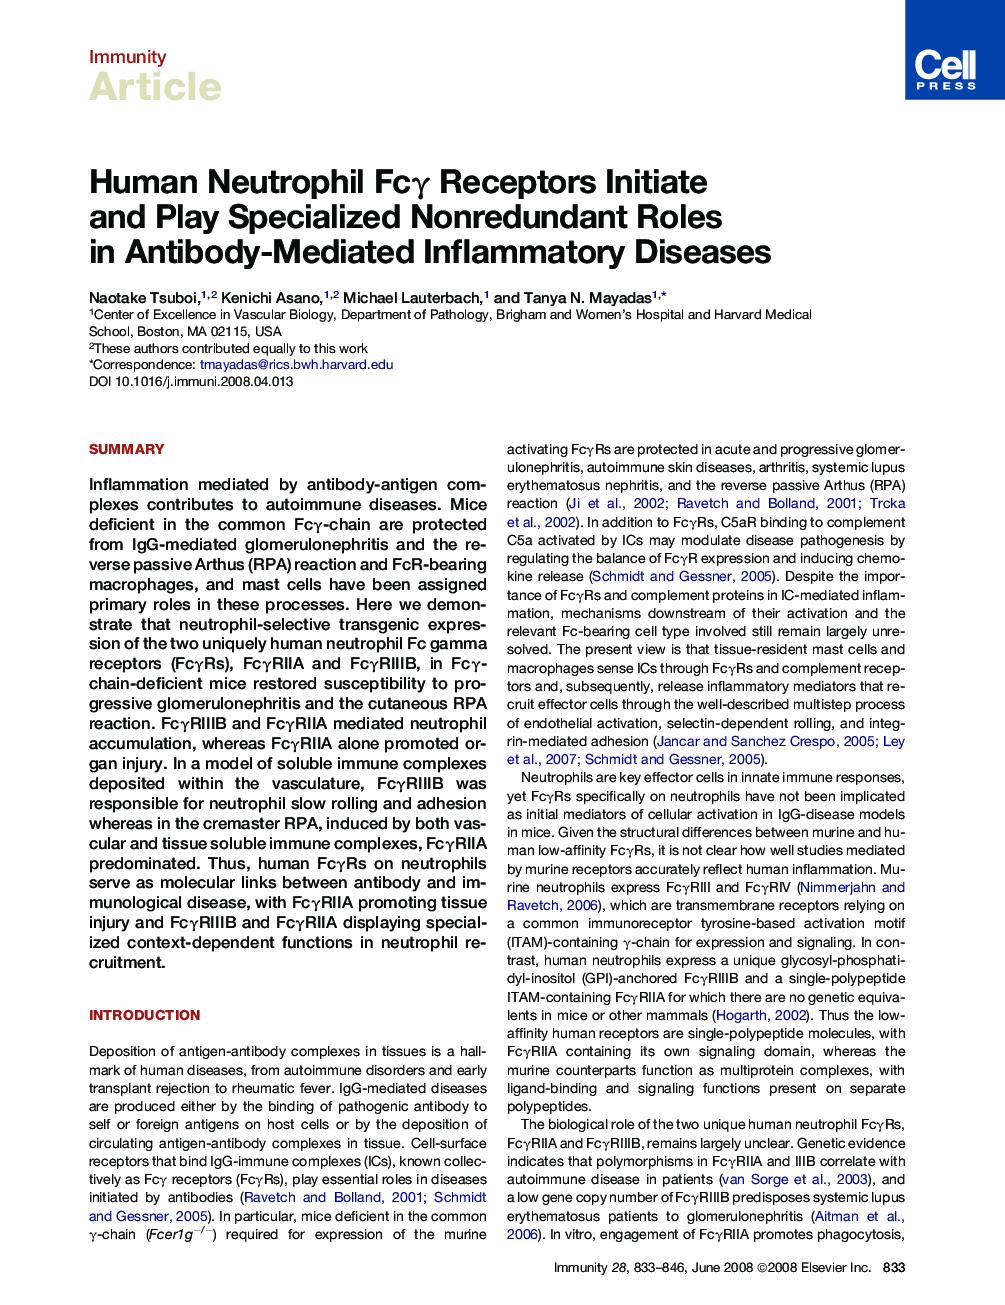 Human Neutrophil Fcγ Receptors Initiate and Play Specialized Nonredundant Roles in Antibody-Mediated Inflammatory Diseases